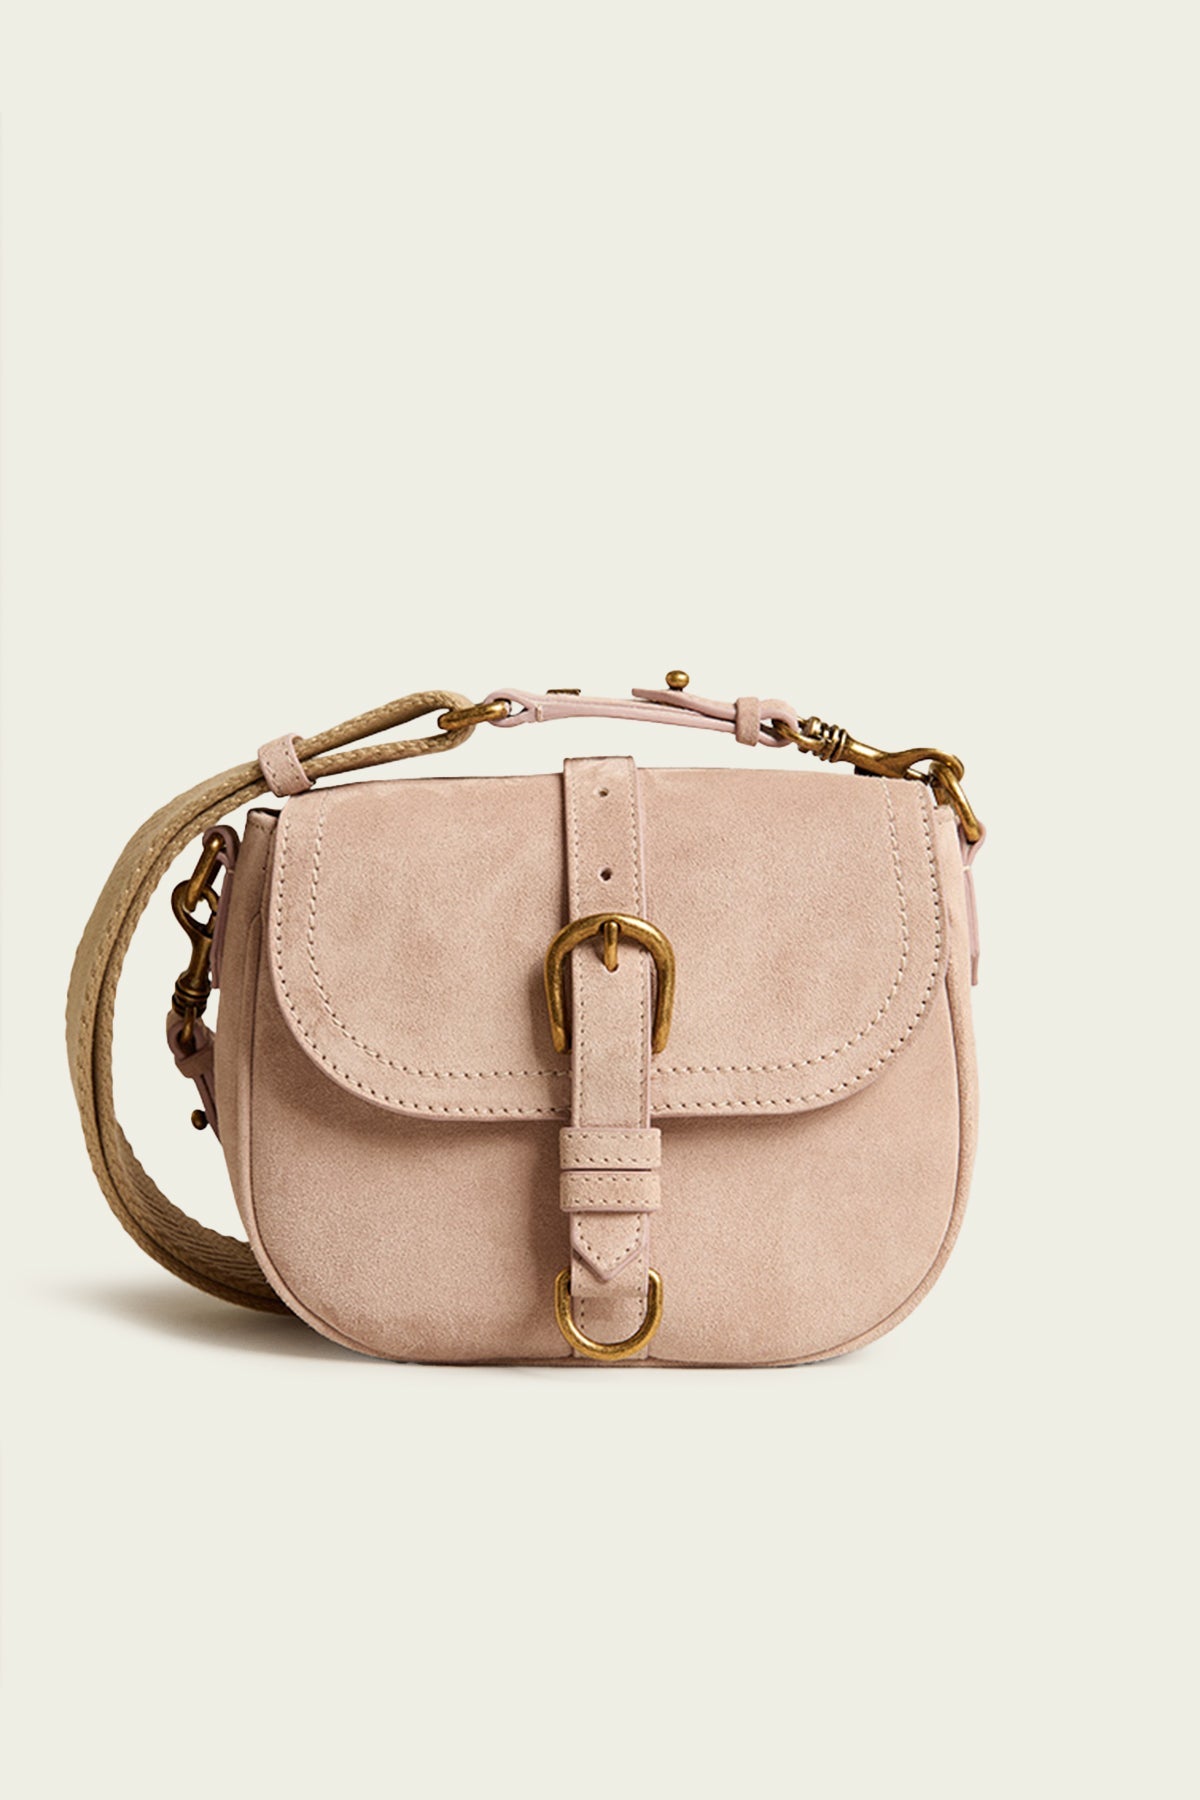 Sally Suede Leather Small Bag in Nude - shop-olivia.com